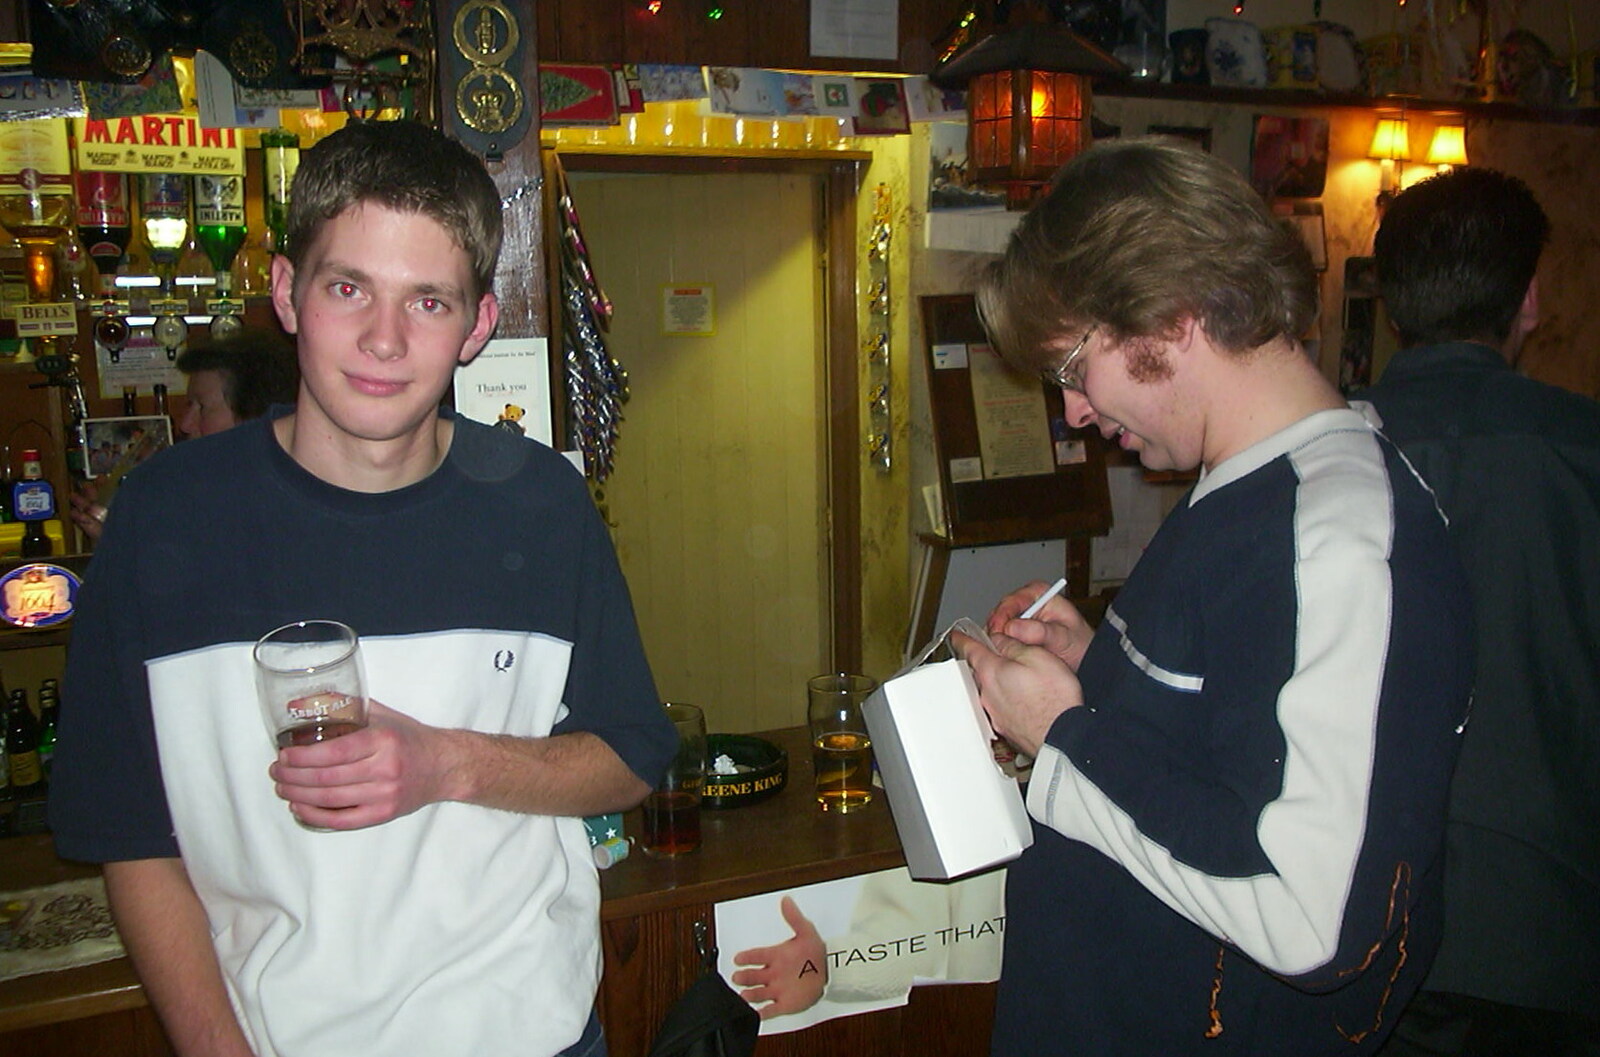 New Year's Eve at the Swan Inn, Brome, Suffolk - 31st December 2002: The Boy Phil looks up as Marc draws something